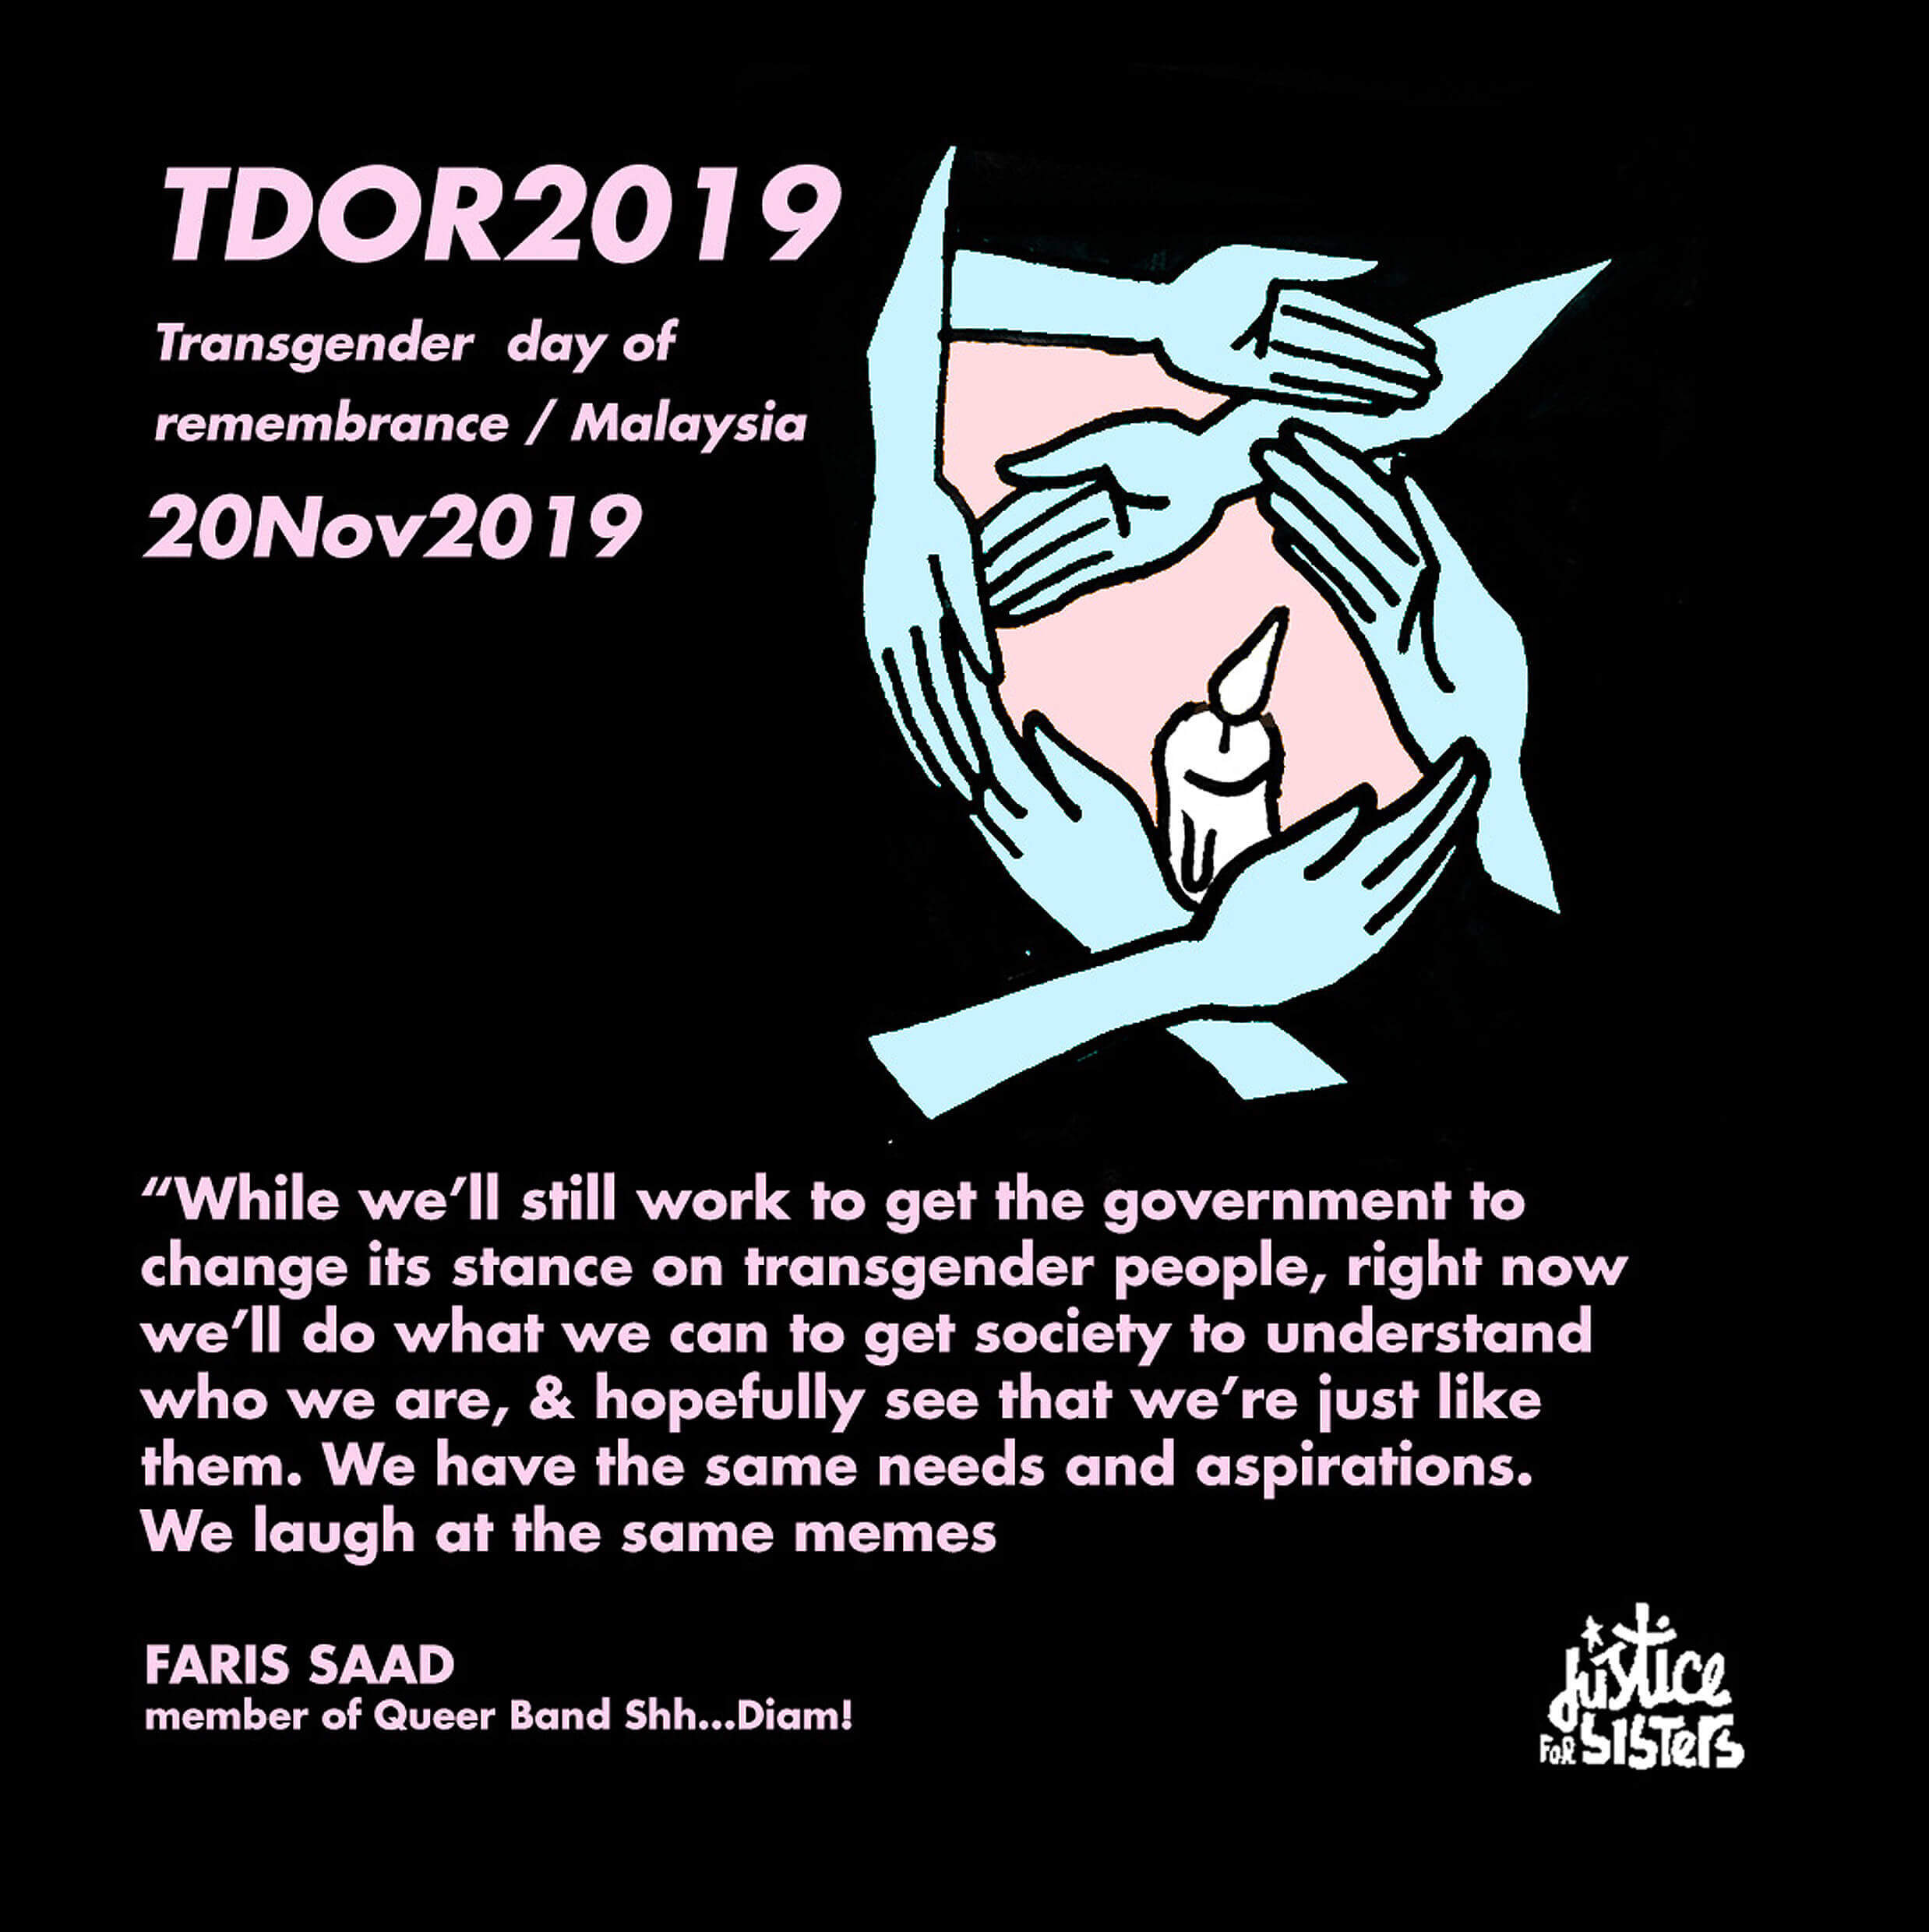 An illustration of hands surrounding a candle sits to the side of text that reads “TDOR 2019, Transgender Day of Remembrance/Malaysia, 2019” and "While we'll still work to get the government to change its stance on transgender people, right now we'll do what we can to get society to understand who we are and hopefully see that we're just like them. We have the same needs and aspirations. We laugh at the same memes.—Faris Saad, member of queer band Shh…Diam!”